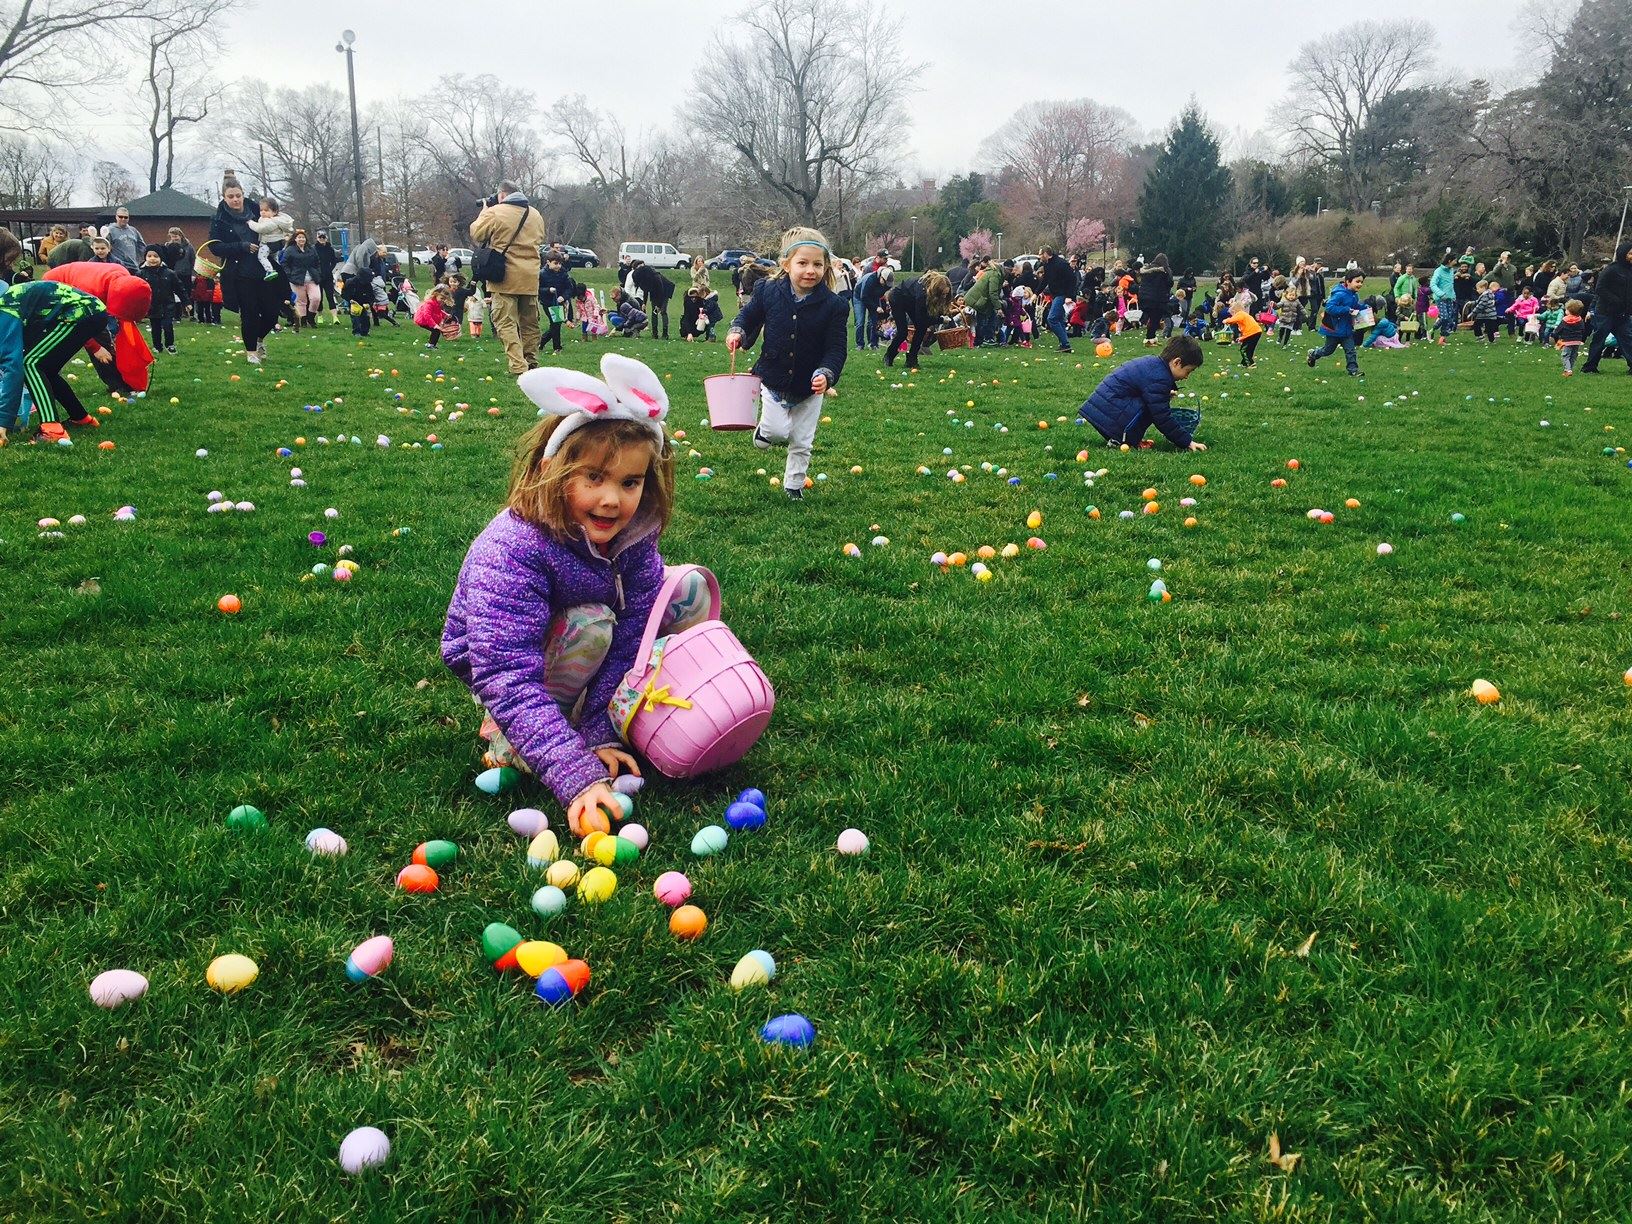 Maplewood Hosts Spring Egg Hunt Sunday March 25 in Memorial Park The